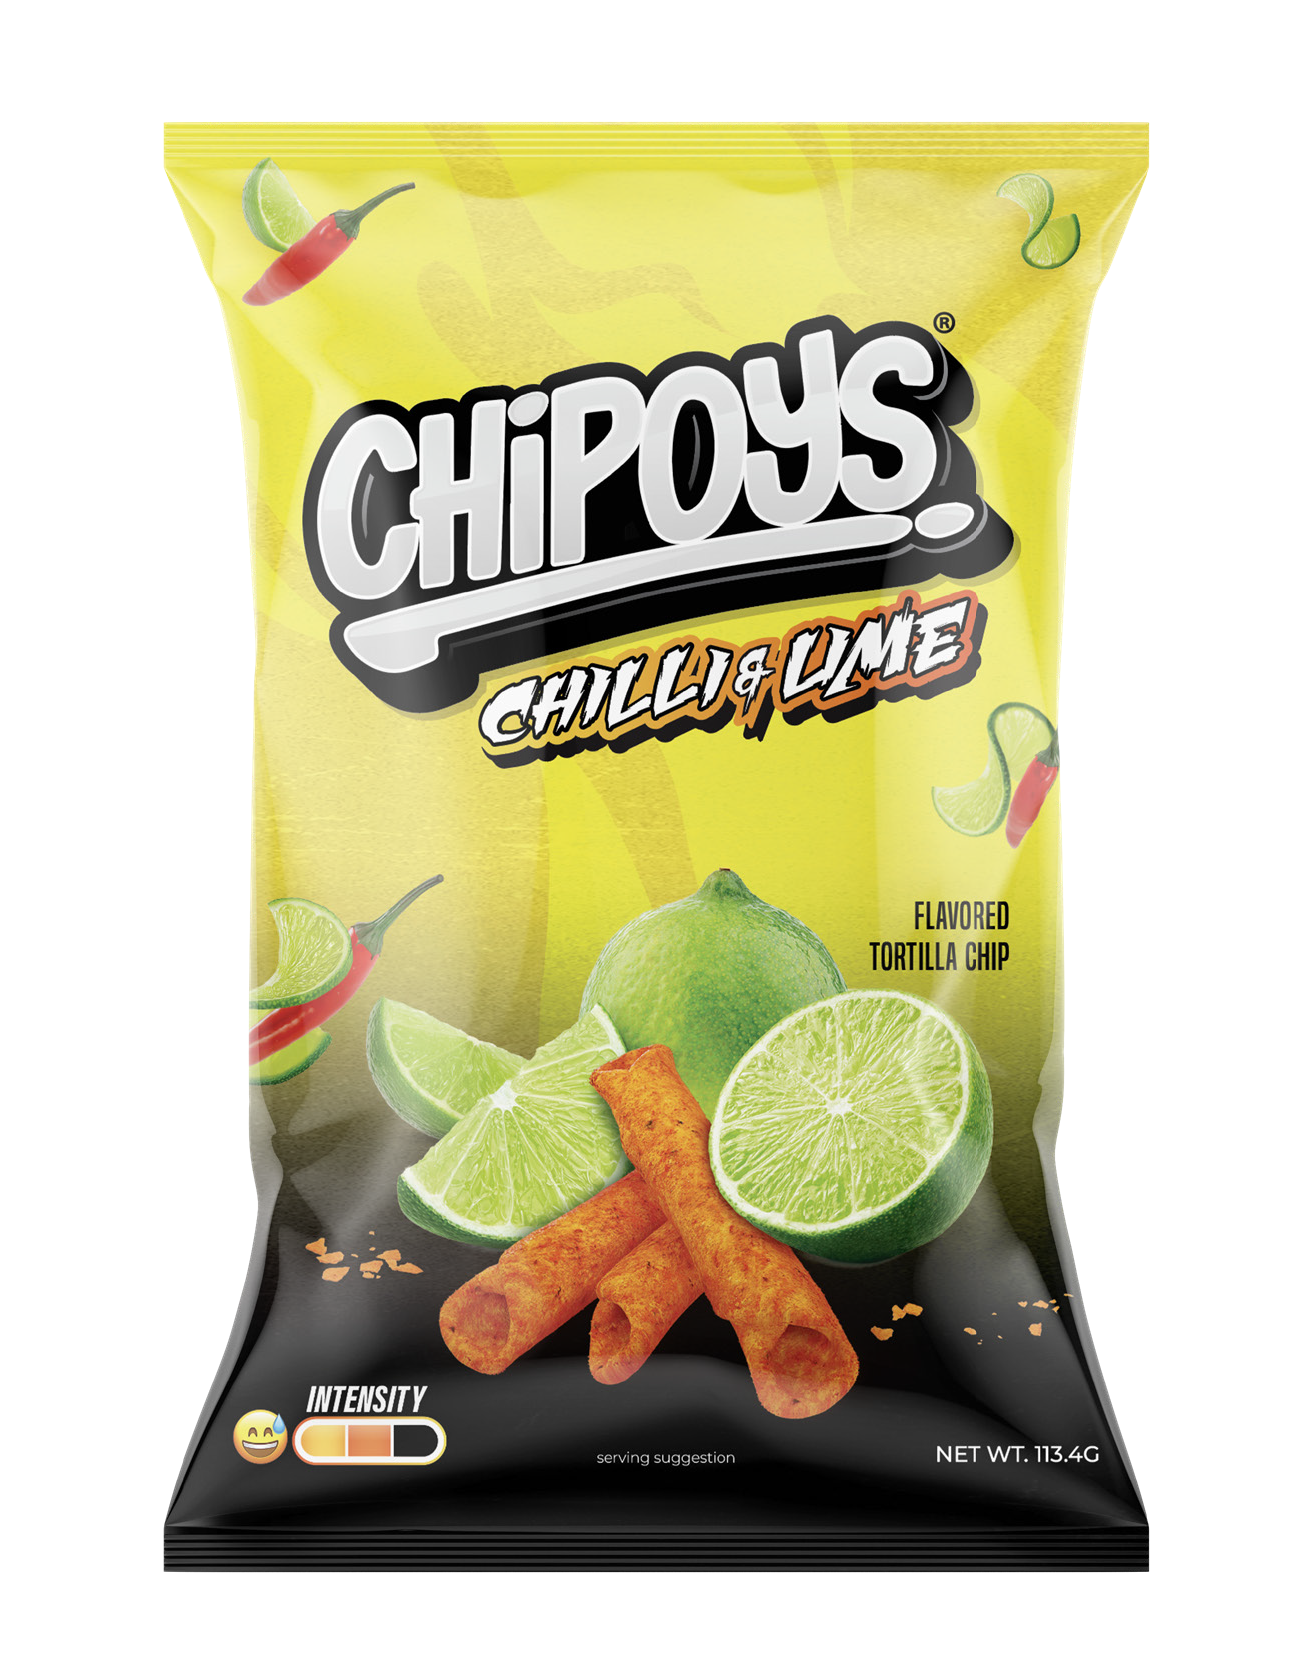 US snack brand Chipoys launches in UK